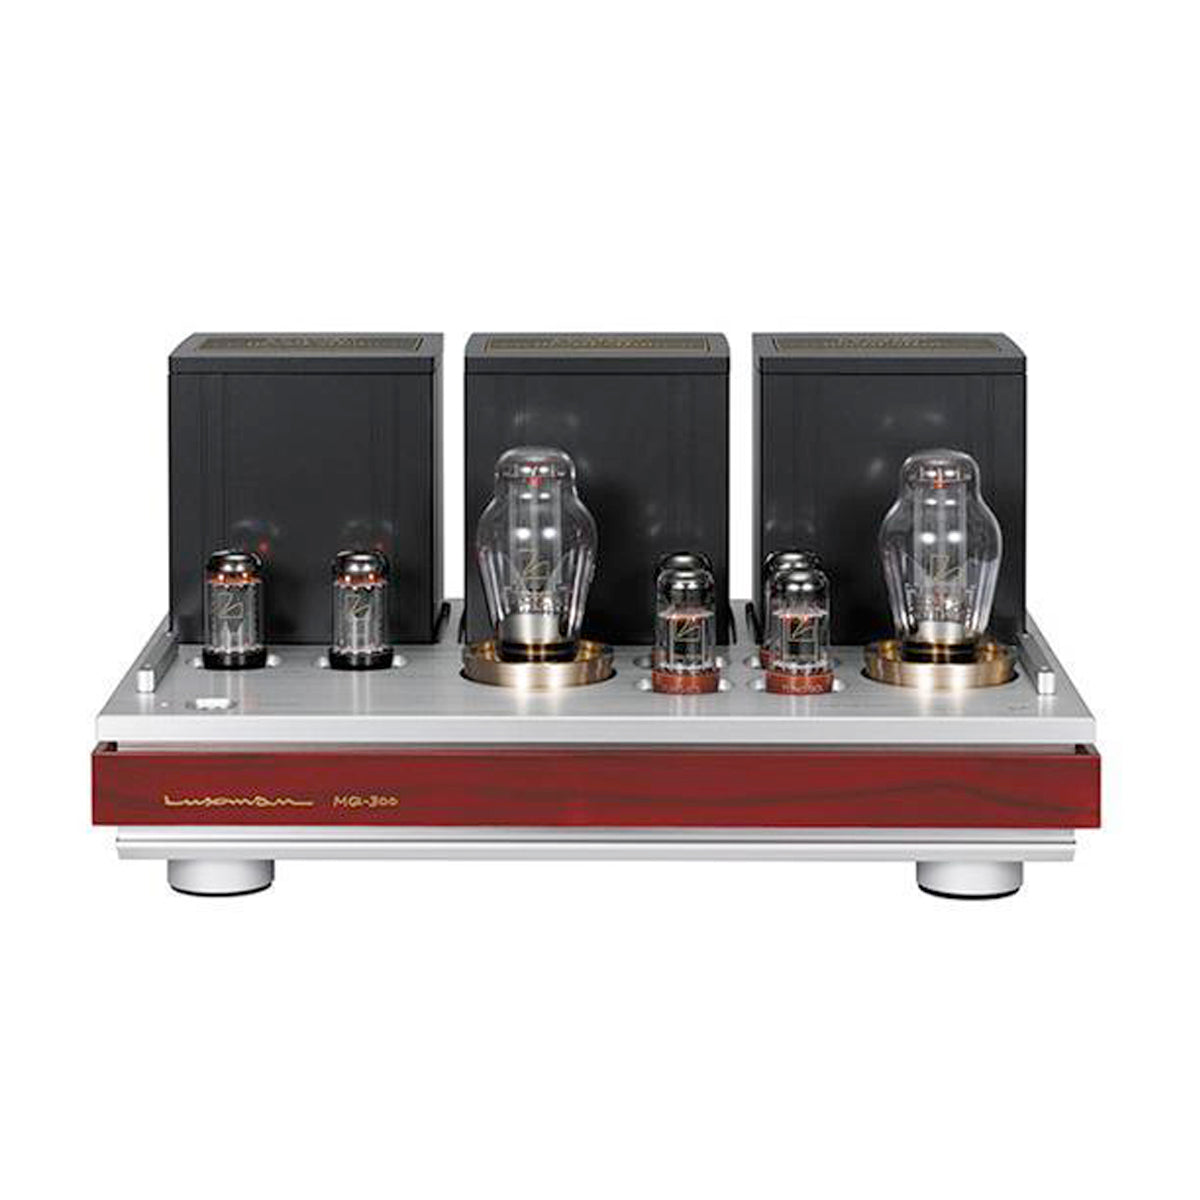 LUXMAN MQ300 Tube Stereo Power Amplifier (back order) - The Audio Experts